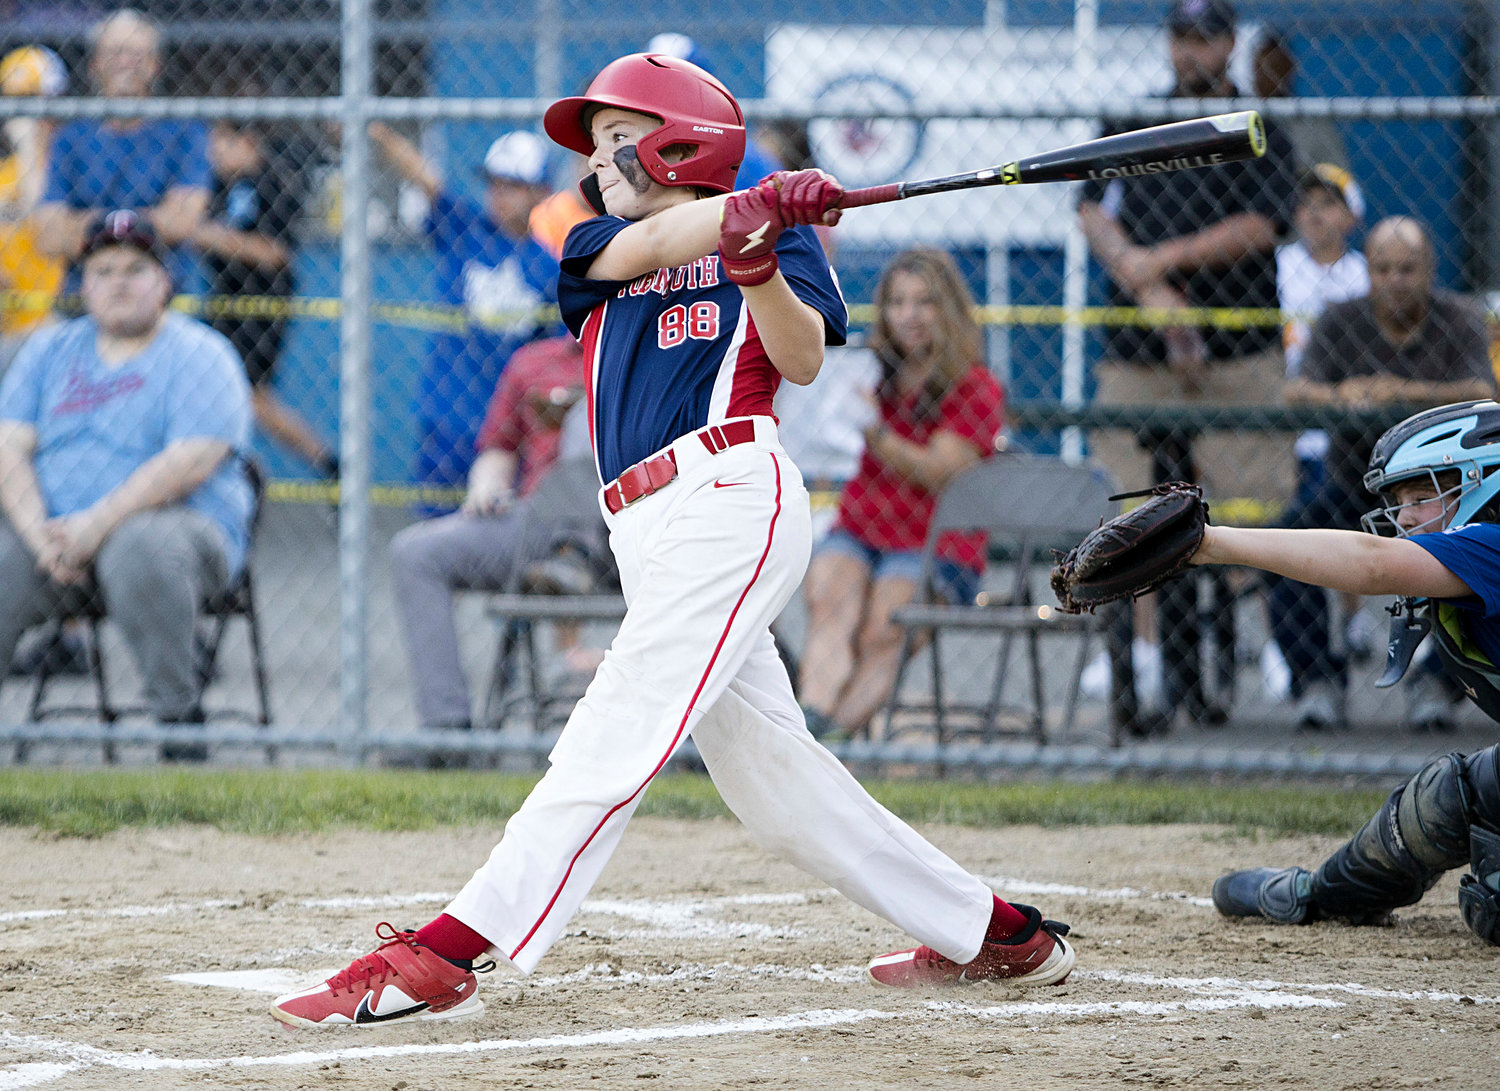 Tyler Doucet takes a hard swing during his first at-bat against Cumberland on Saturday.